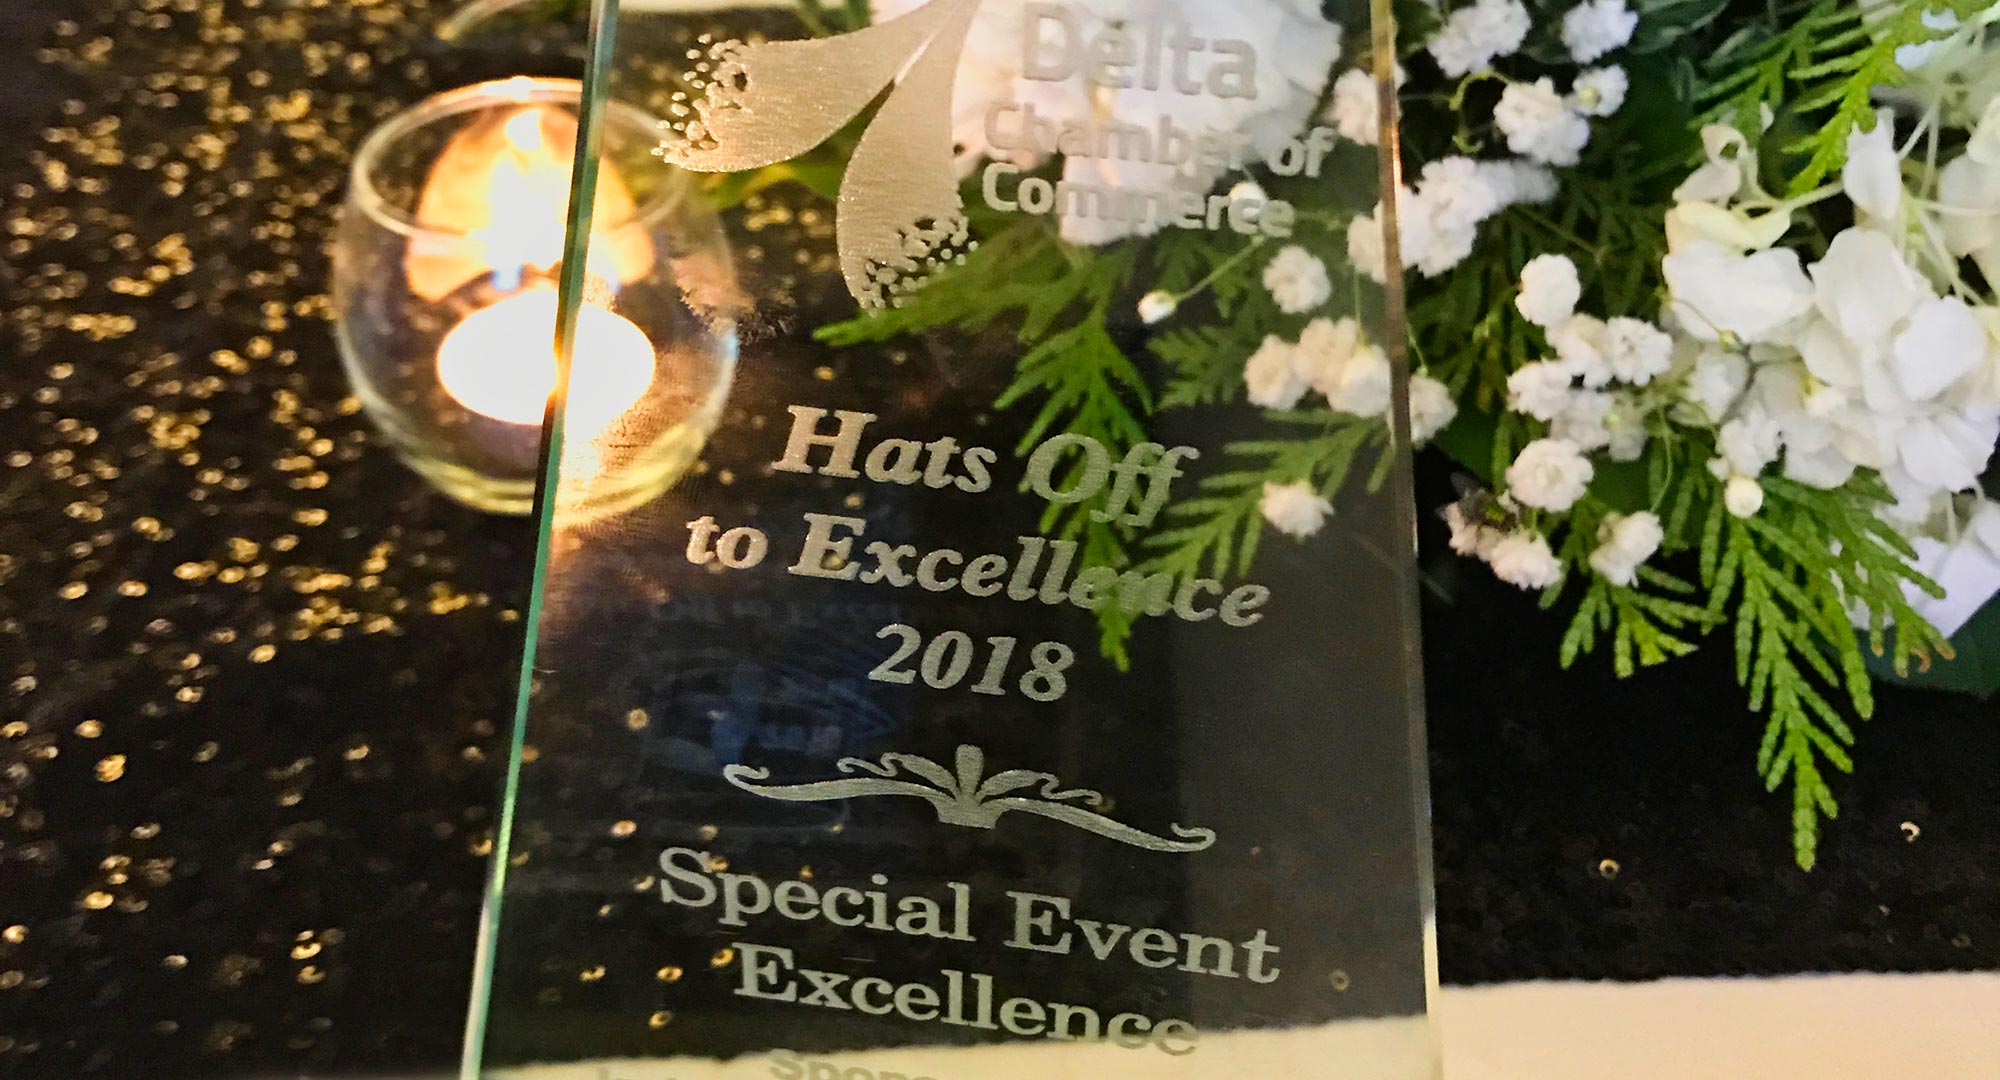 Delta Cup wins 2018 Excellence Award